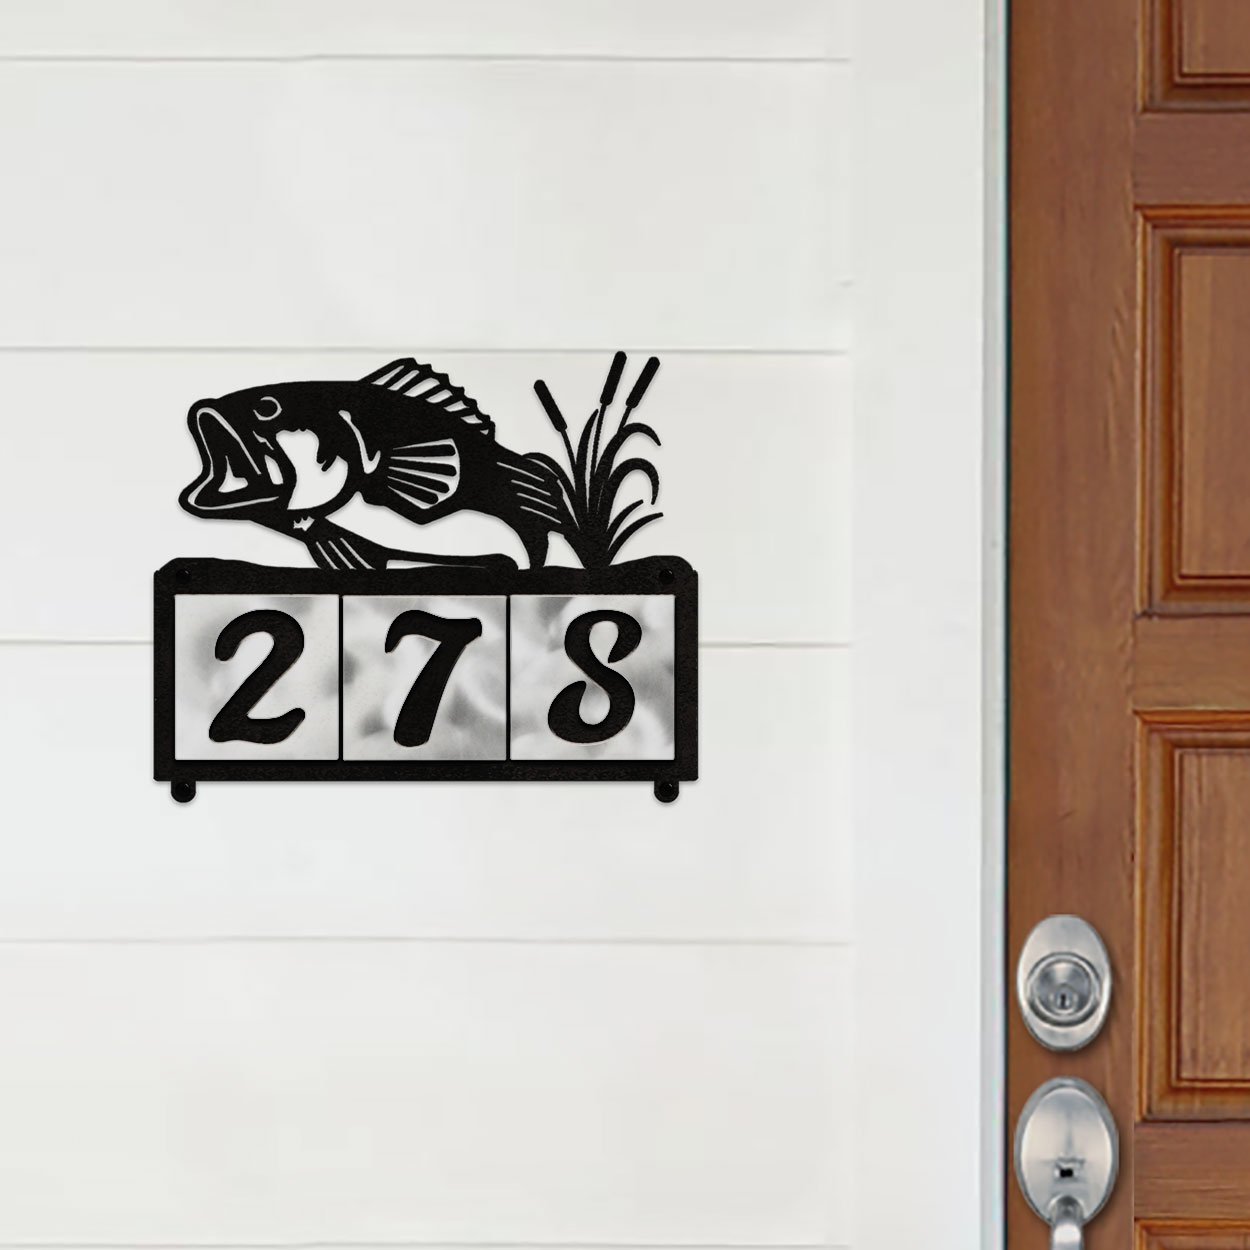 607003 - Jumping Bass in Reeds Design 3-Digit Horizontal 4-inch Tile Outdoor House Numbers